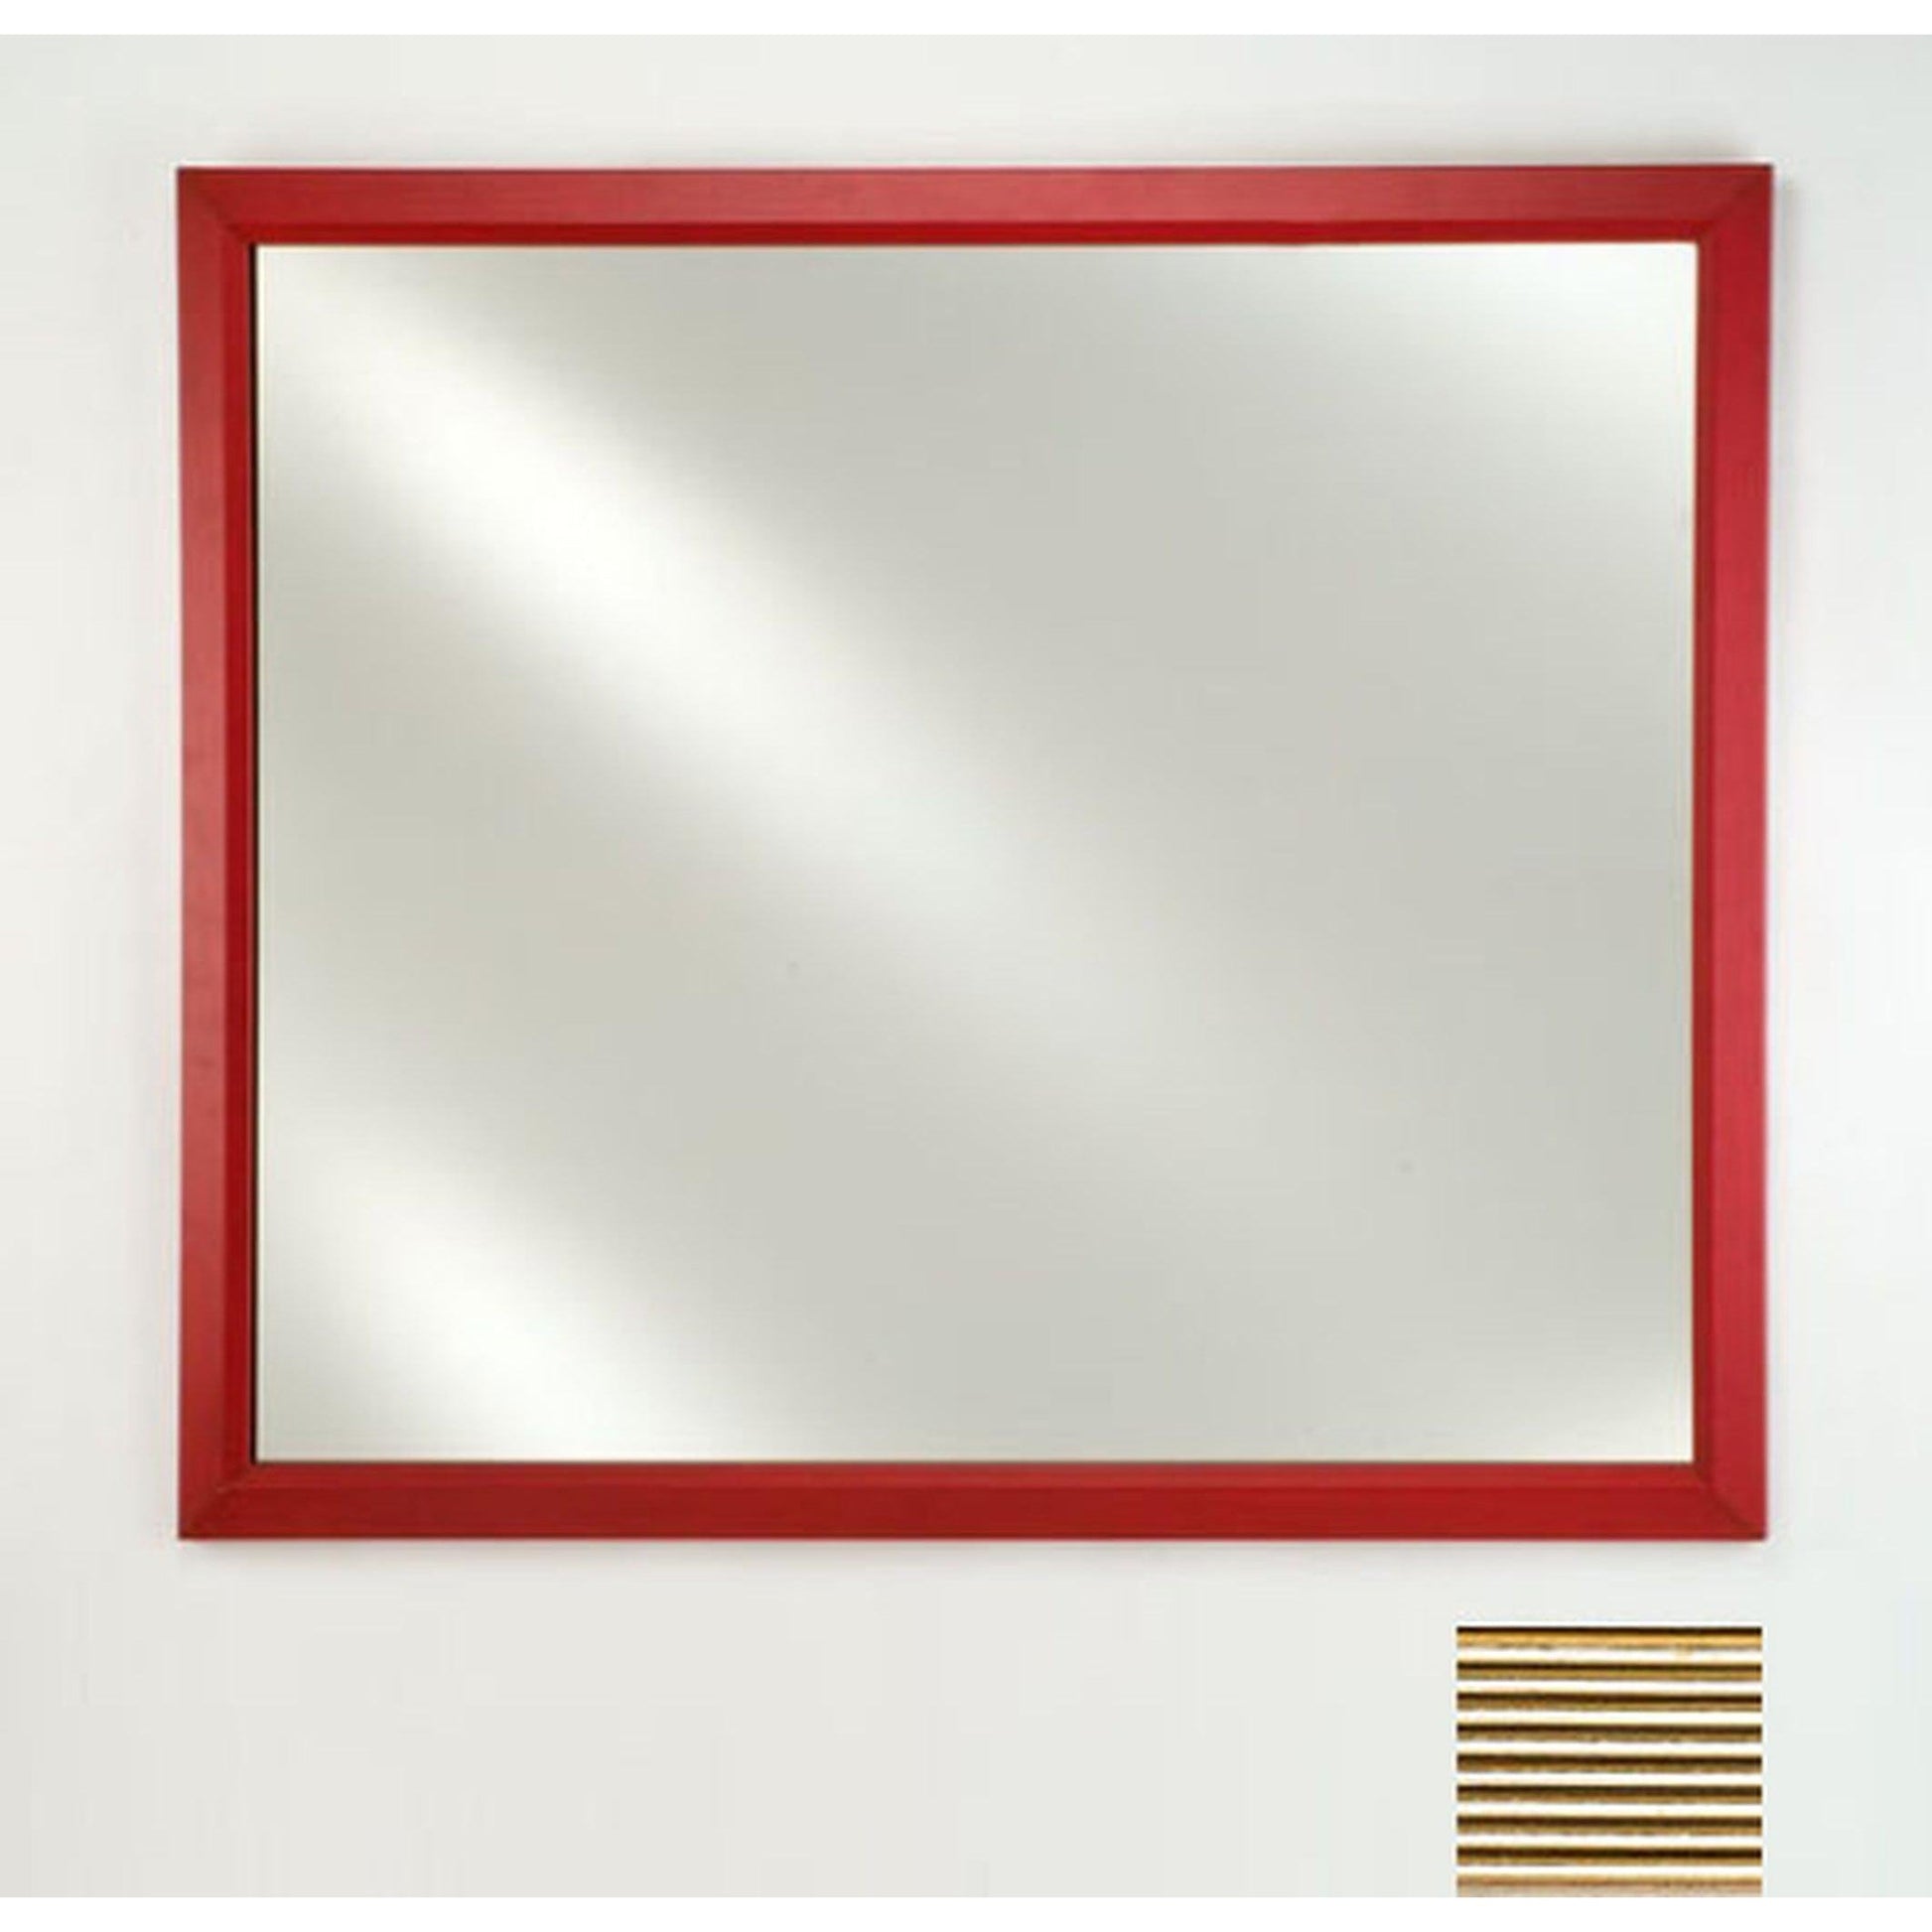 Afina Signature 20" x 26" Meridian Antique Silver With Antique Gold Caps Framed Mirror With Plain Edge